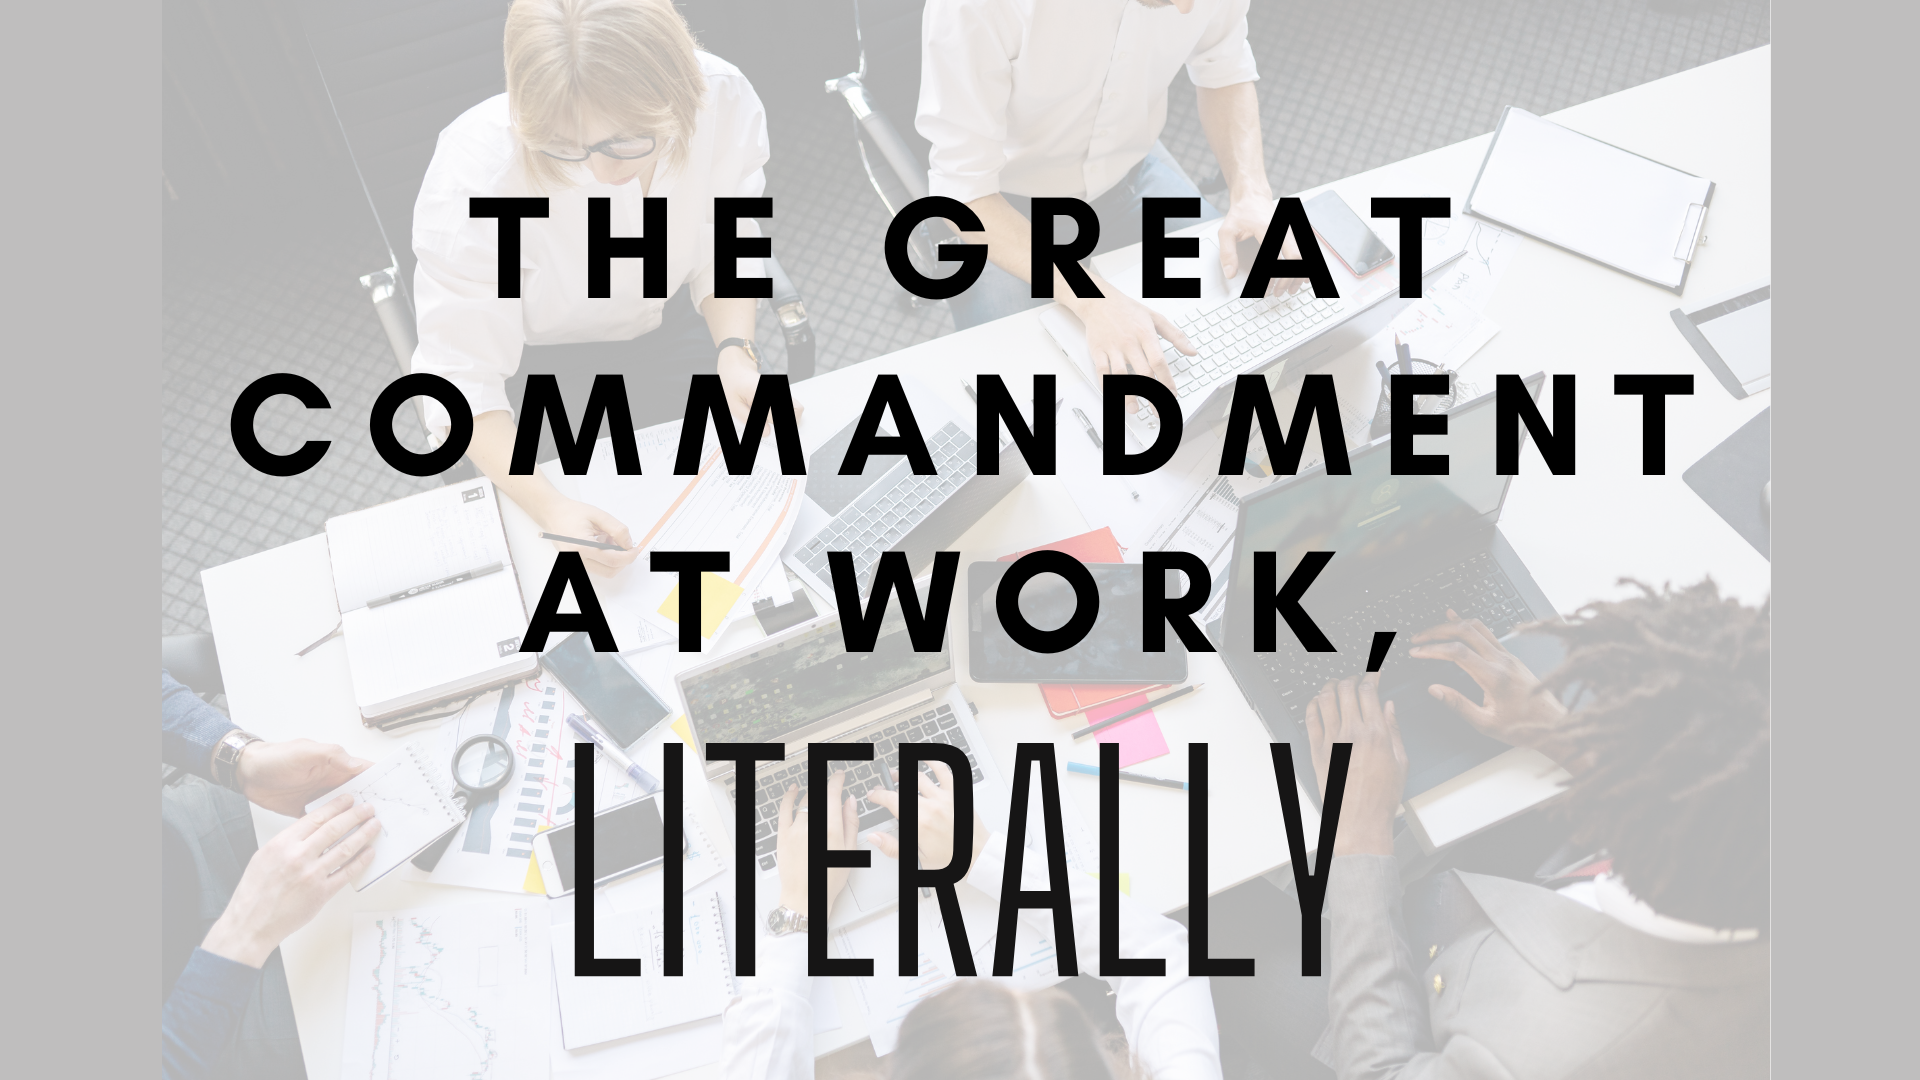 The Great Commandment at Work, Literally.